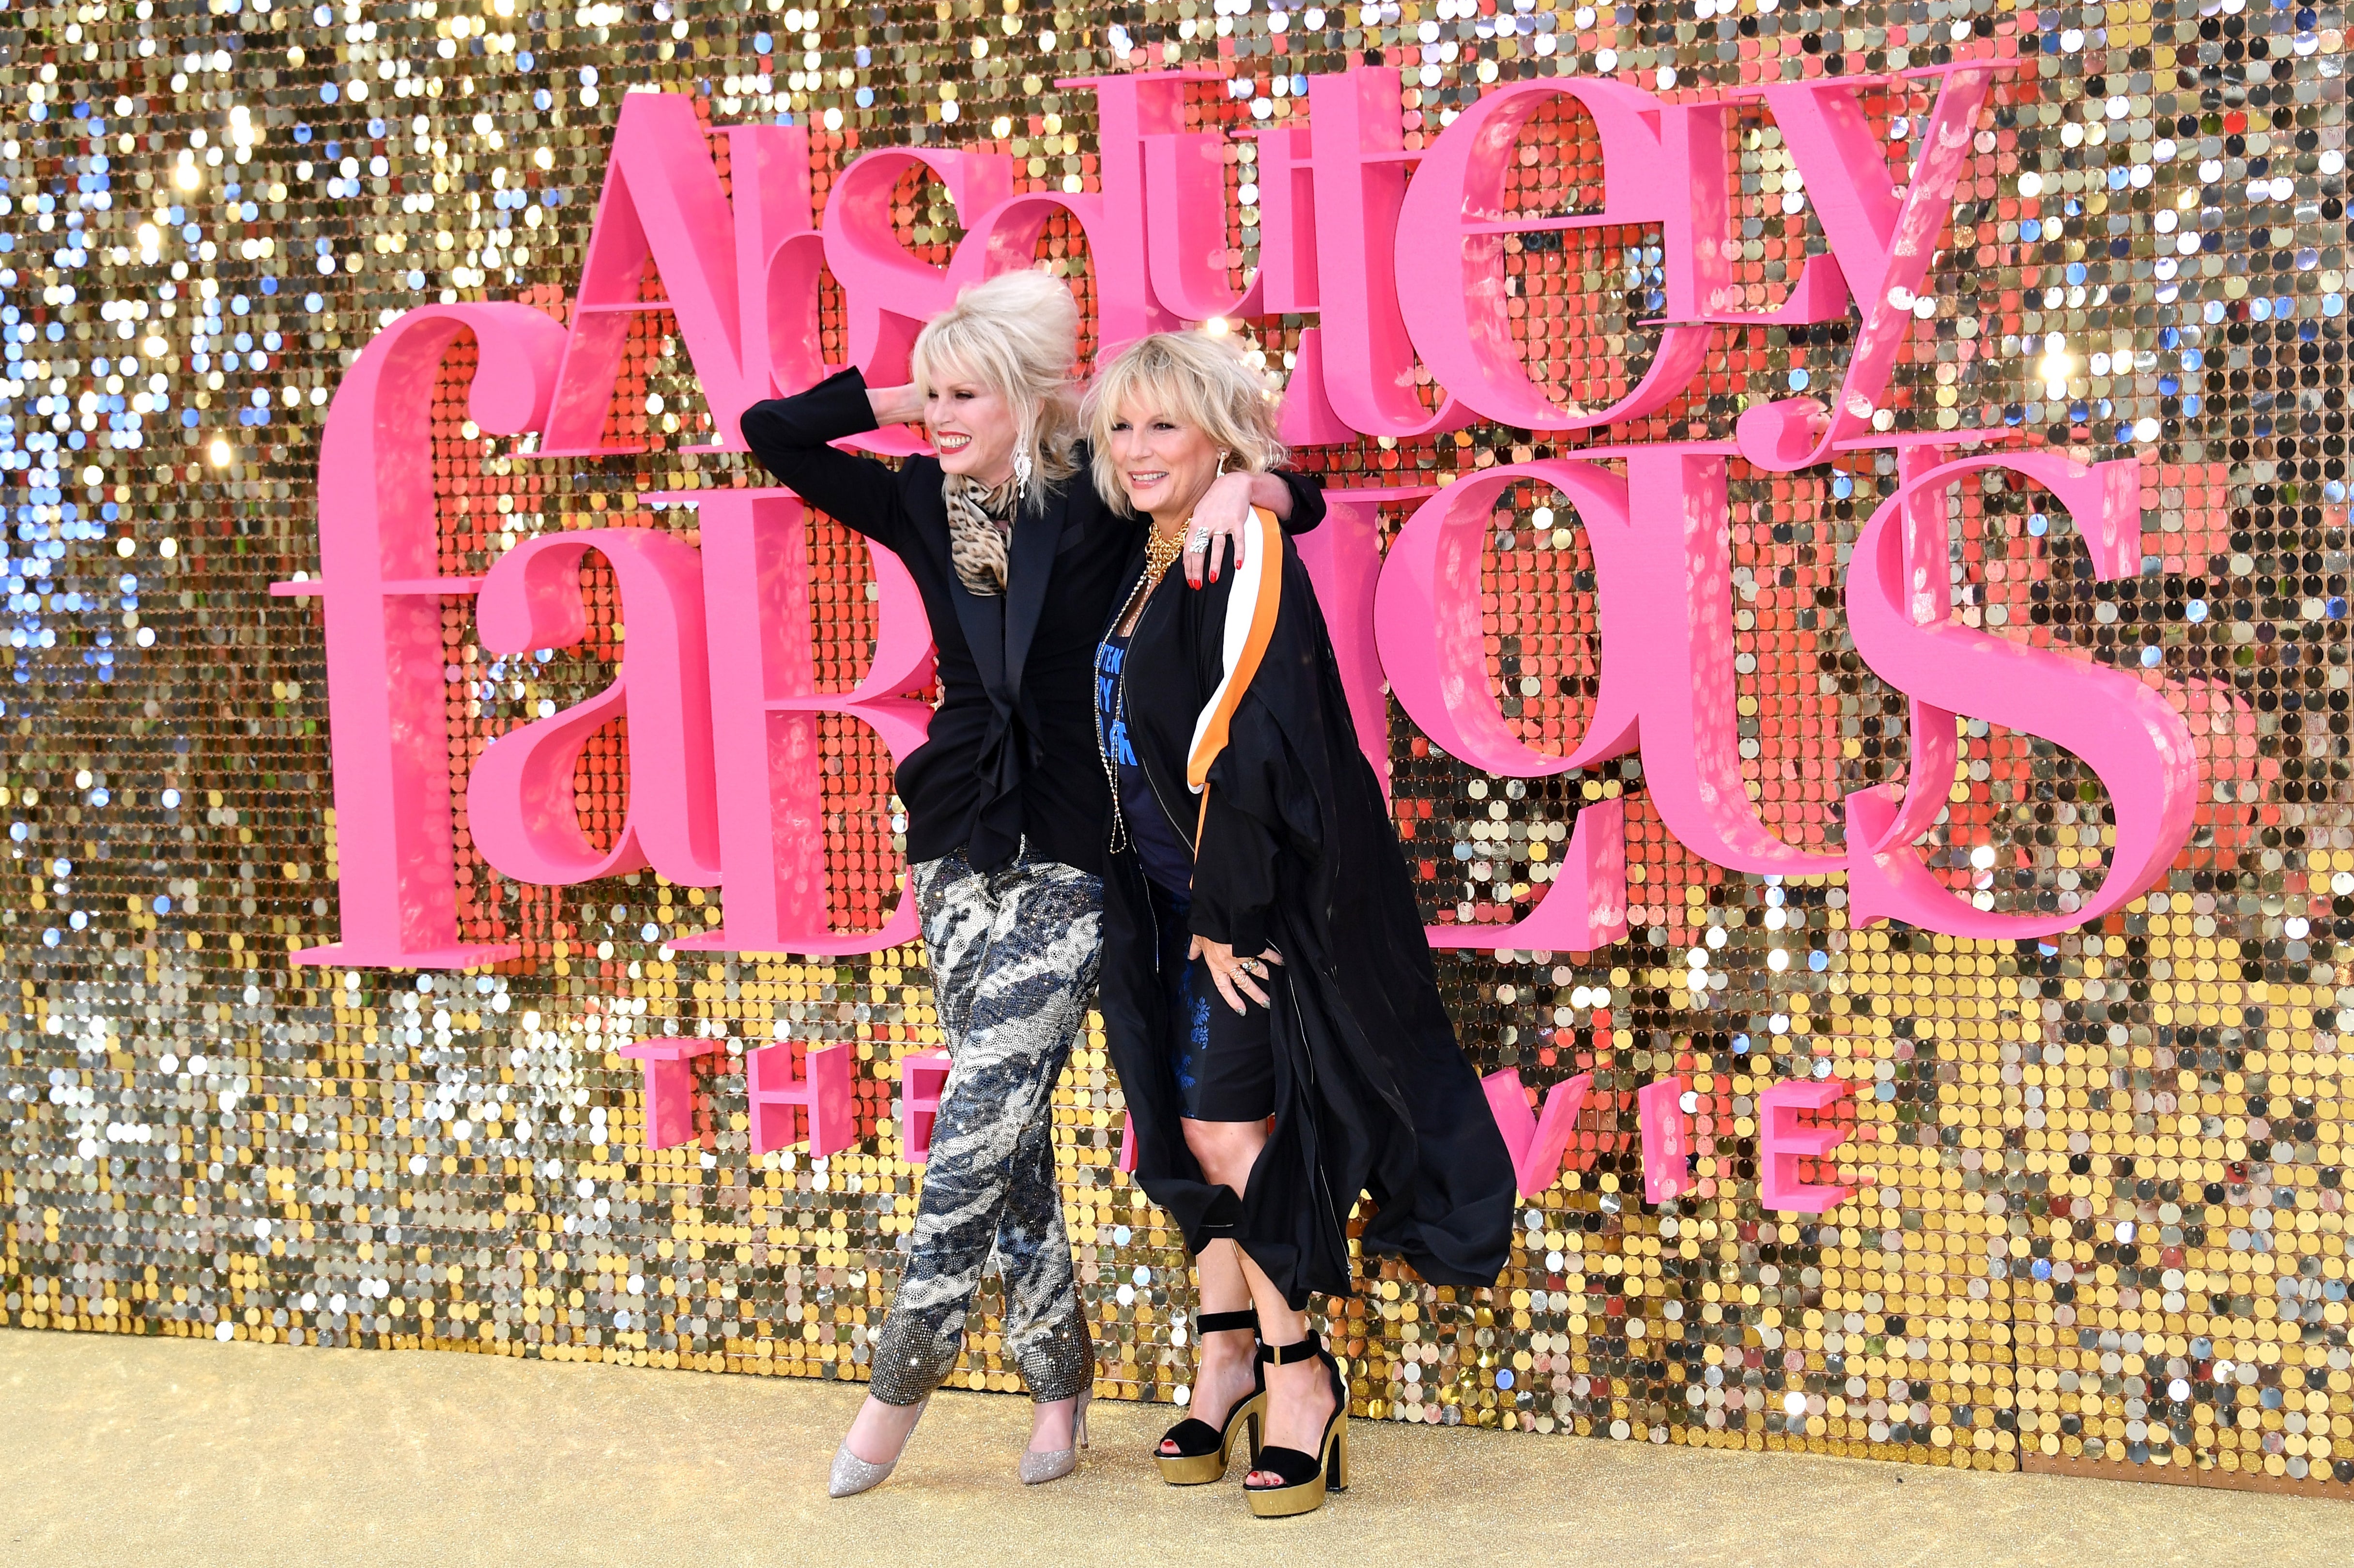 It’s the first time the cast have reunited since ‘Absolutely Fabulous: The Movie’